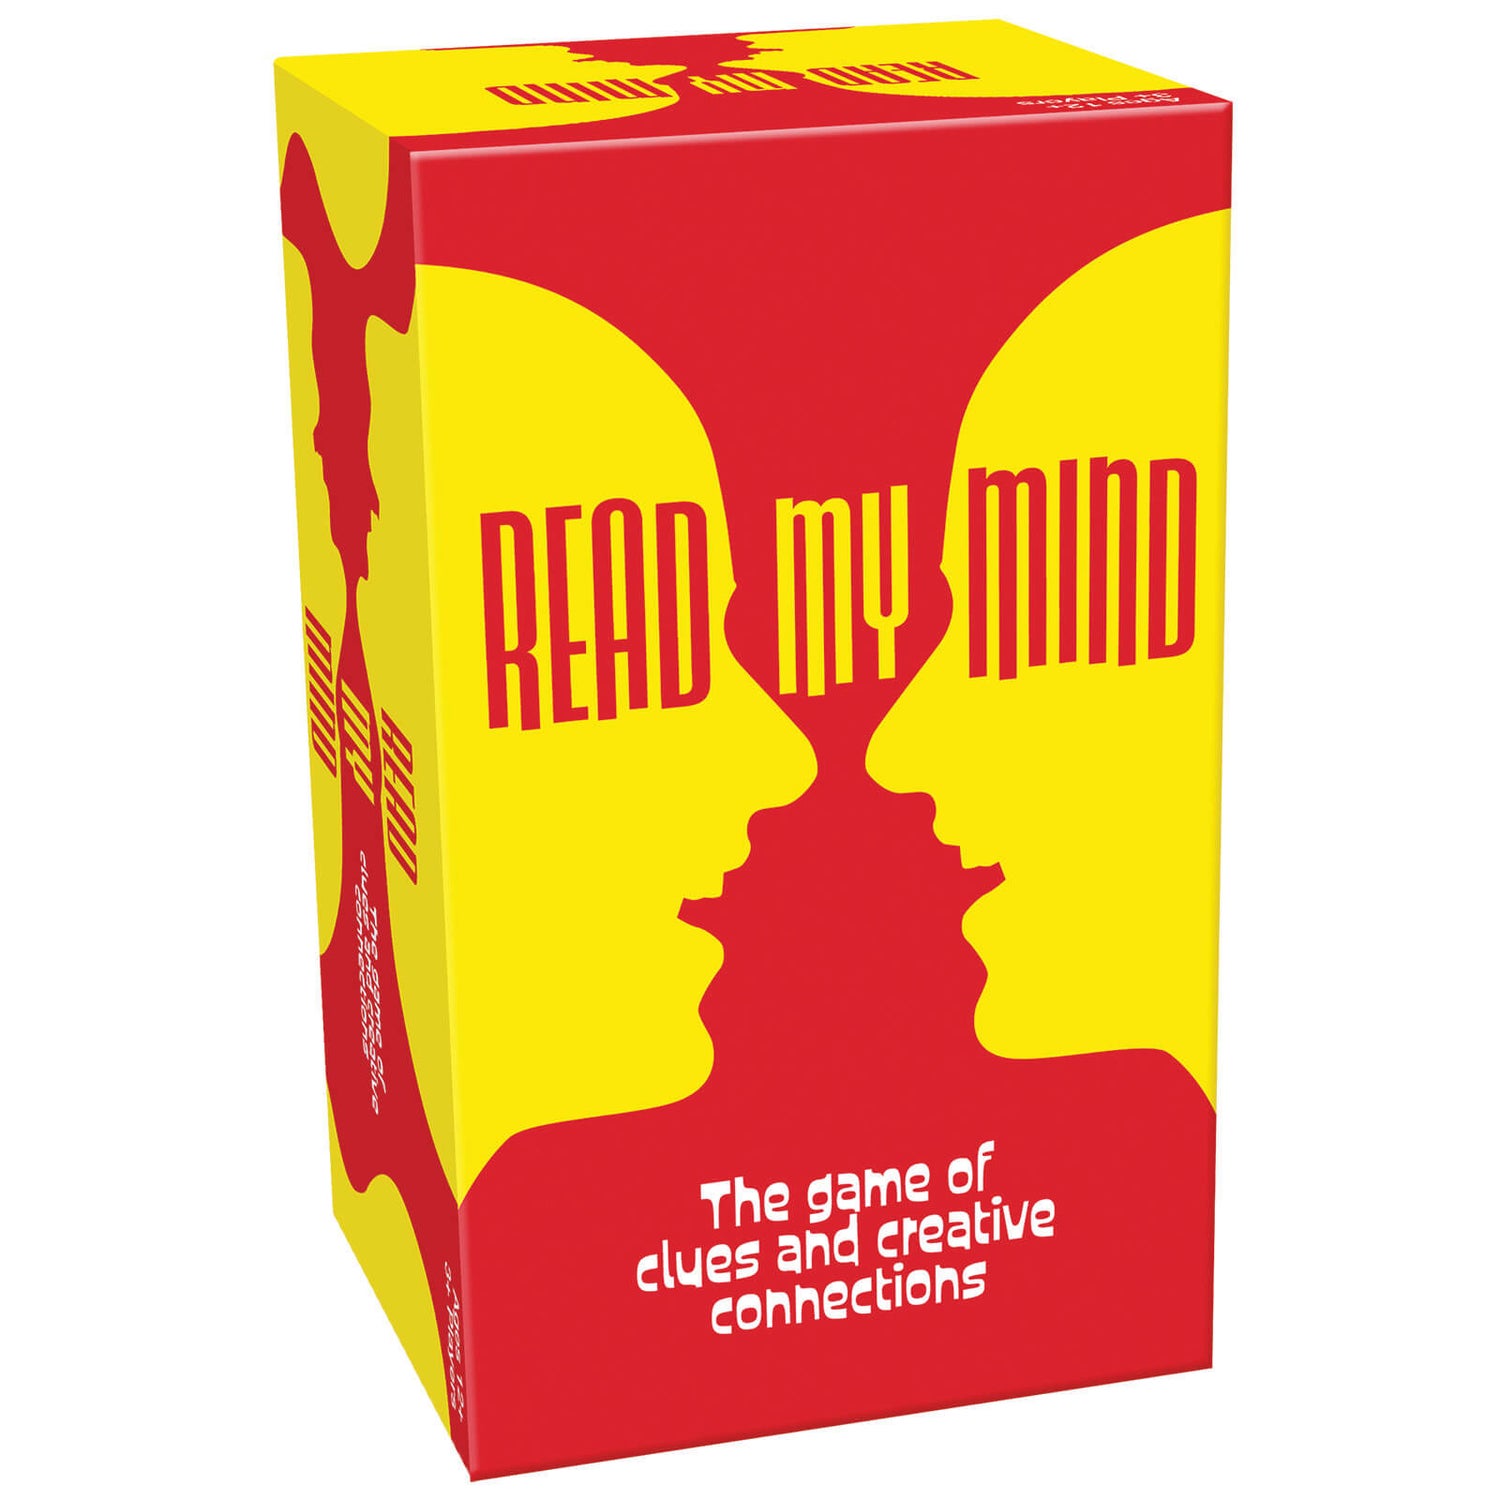 Read my Mind Card Game